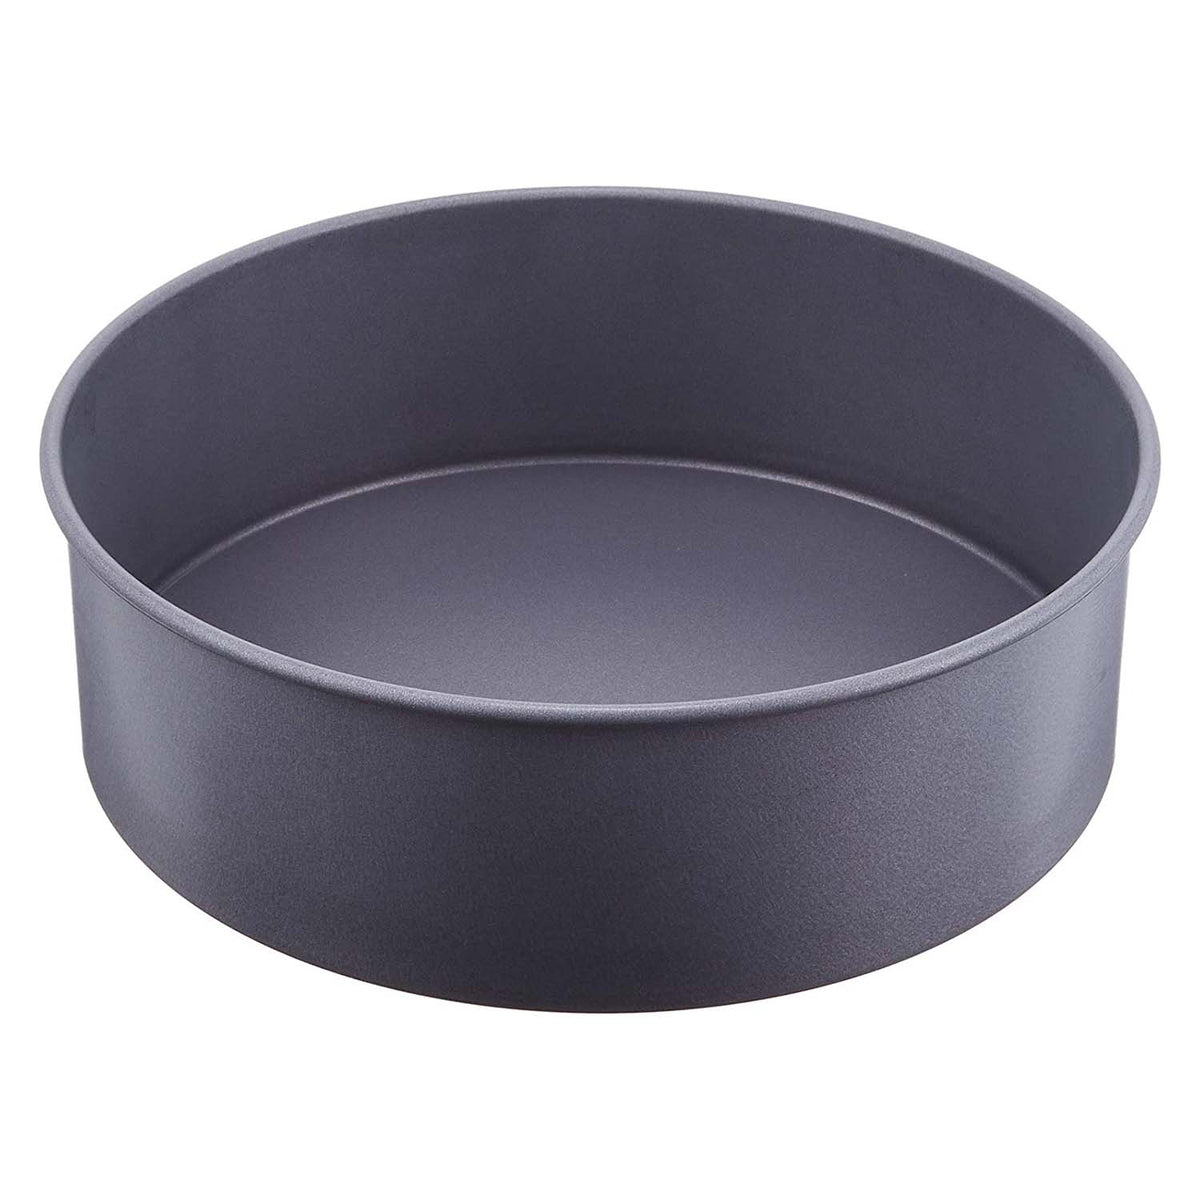 TIGERCROWN Tin Plate Round Cake Pan with Removable Bottom